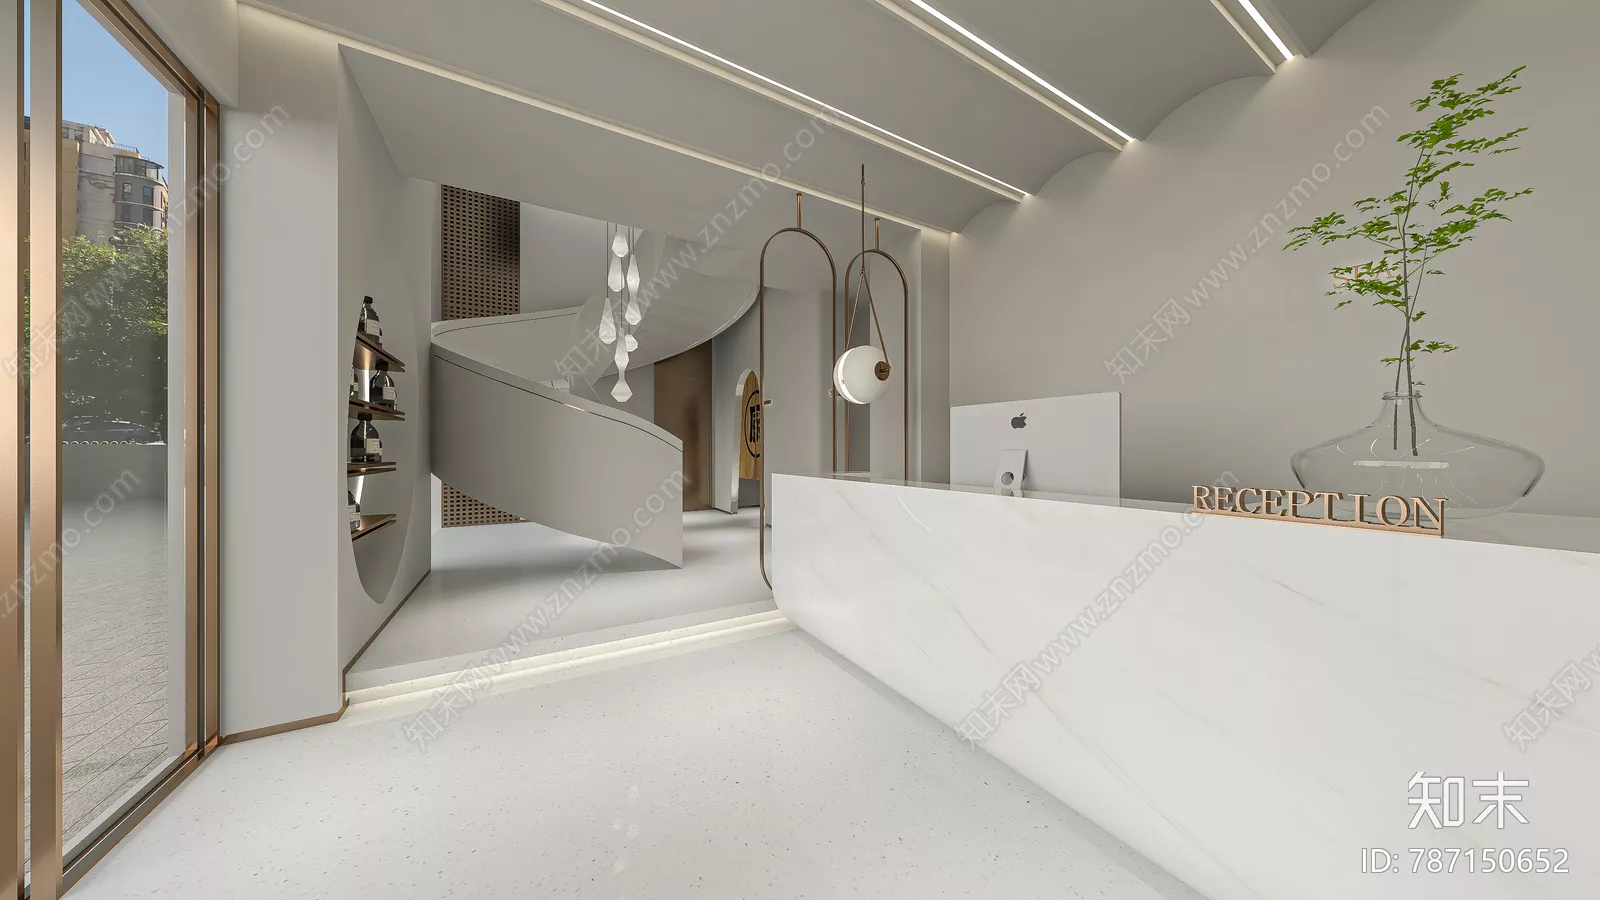 MODERN SPA AND BEAUTY - SKETCHUP 3D SCENE - VRAY OR ENSCAPE - ID13891